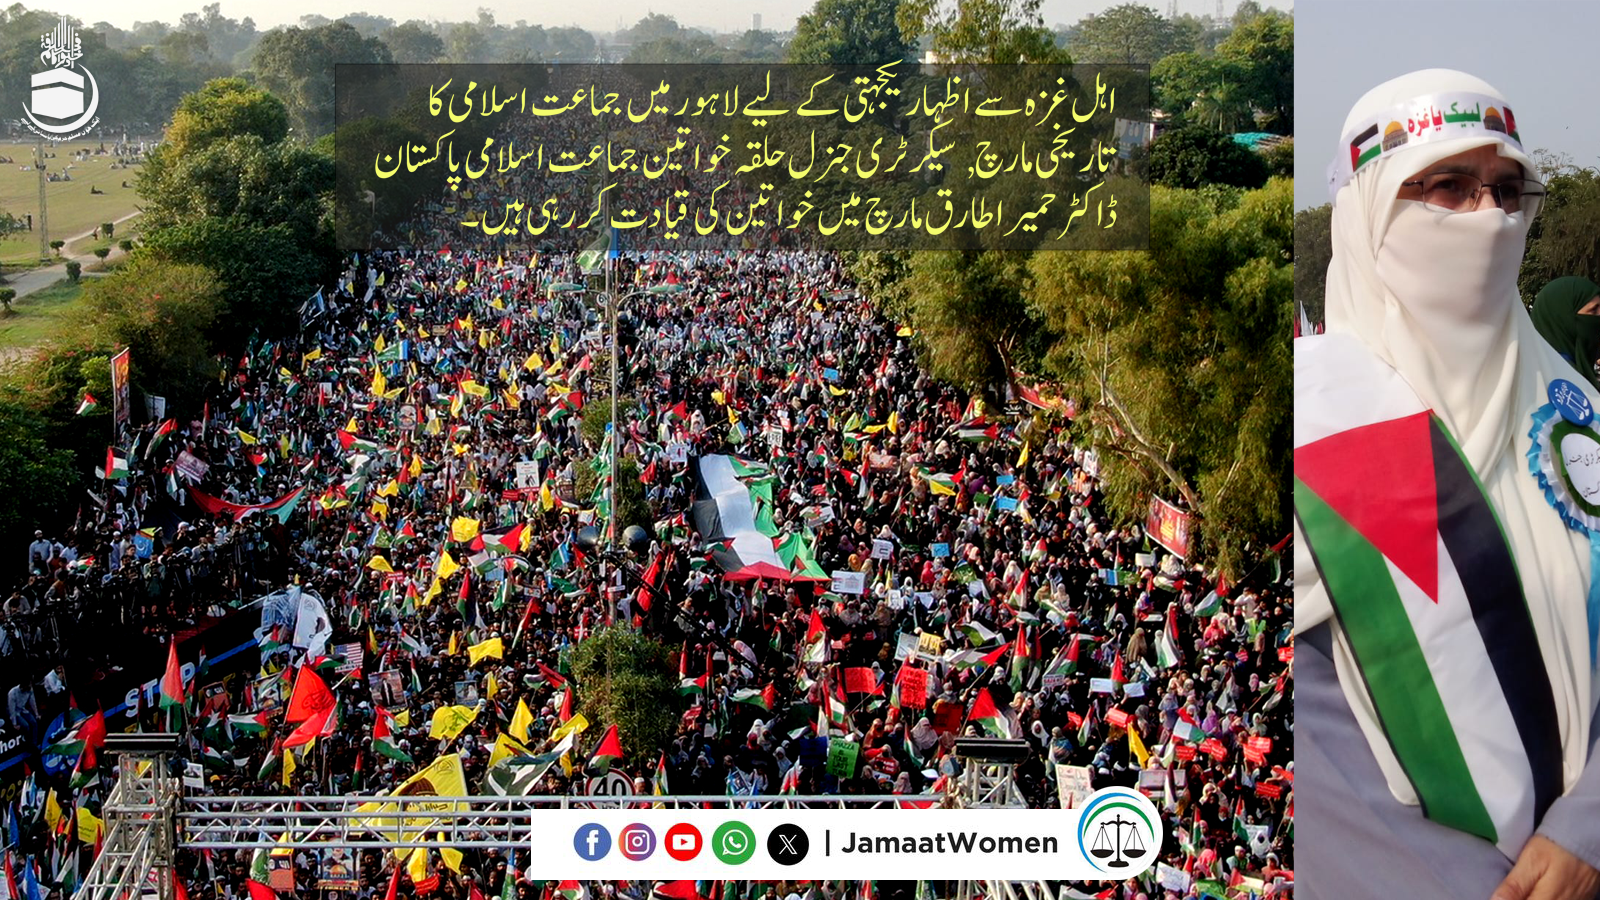 gaza march lahore.png is missing.